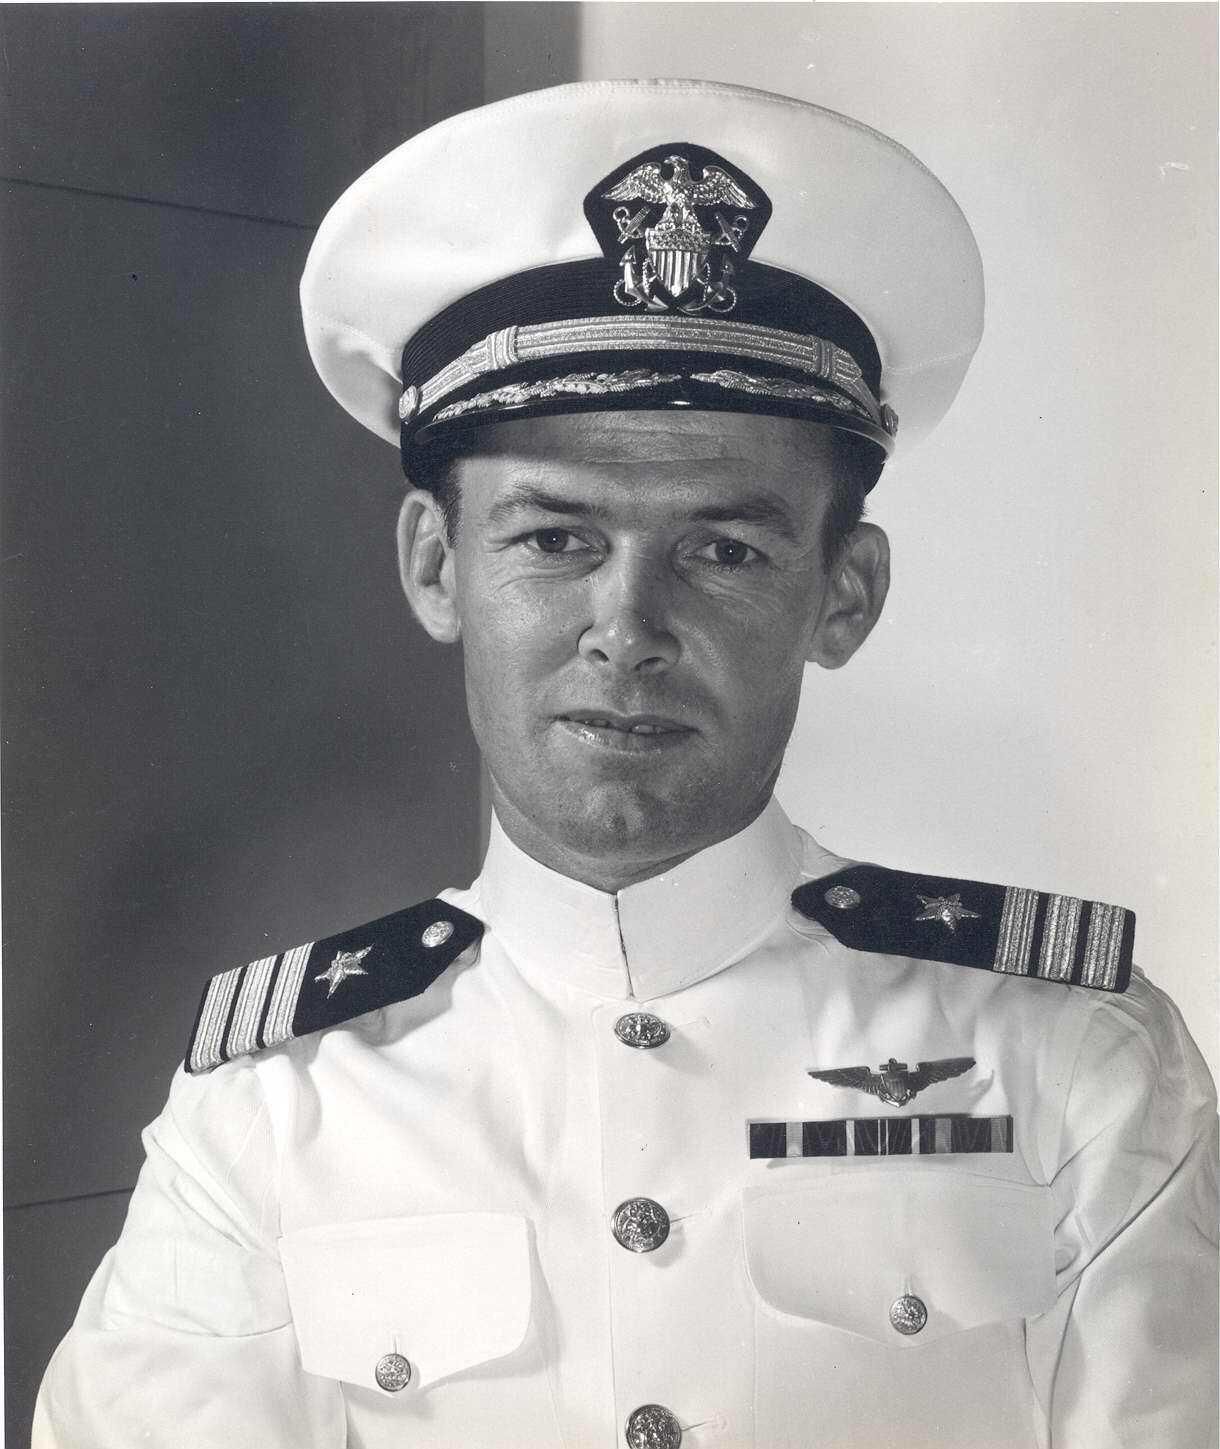 Primary Image of James H. Flatley, Jr. in his Dress Whites